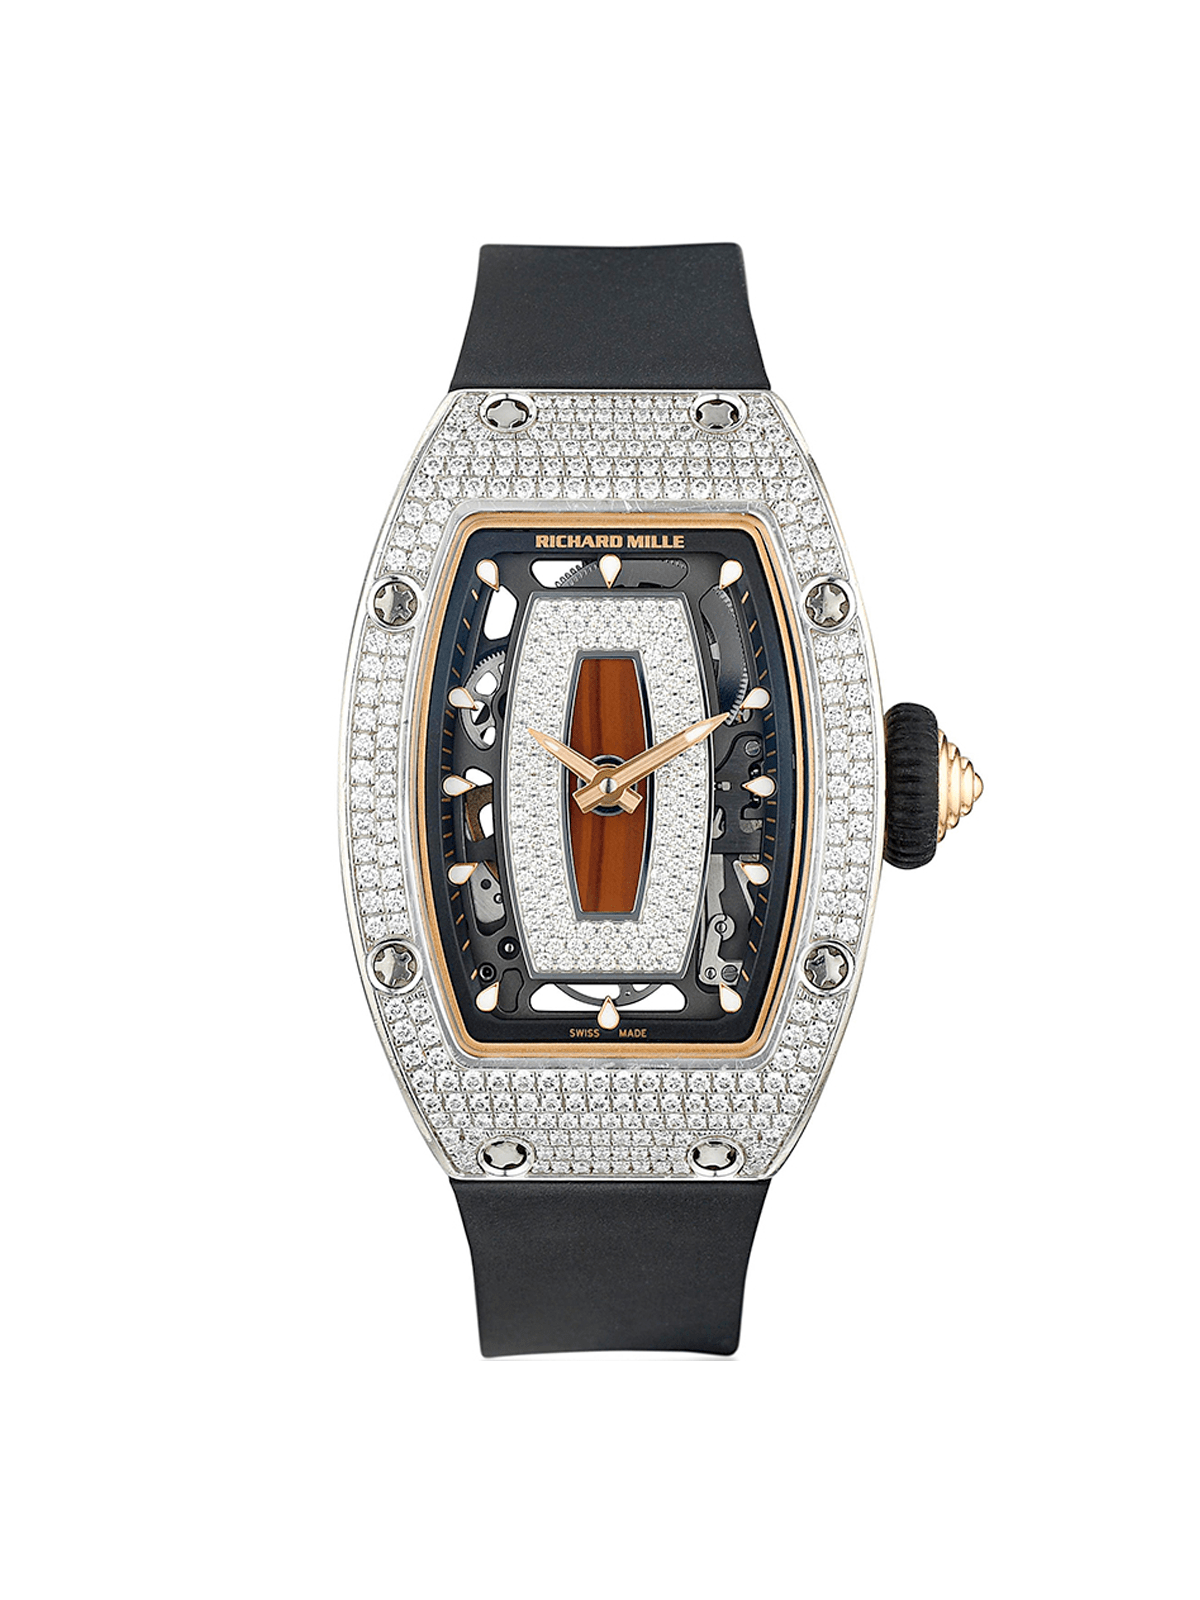 RM07-01 White Gold Full Set Diamonds (Red Lips) Watches Richard Mille 